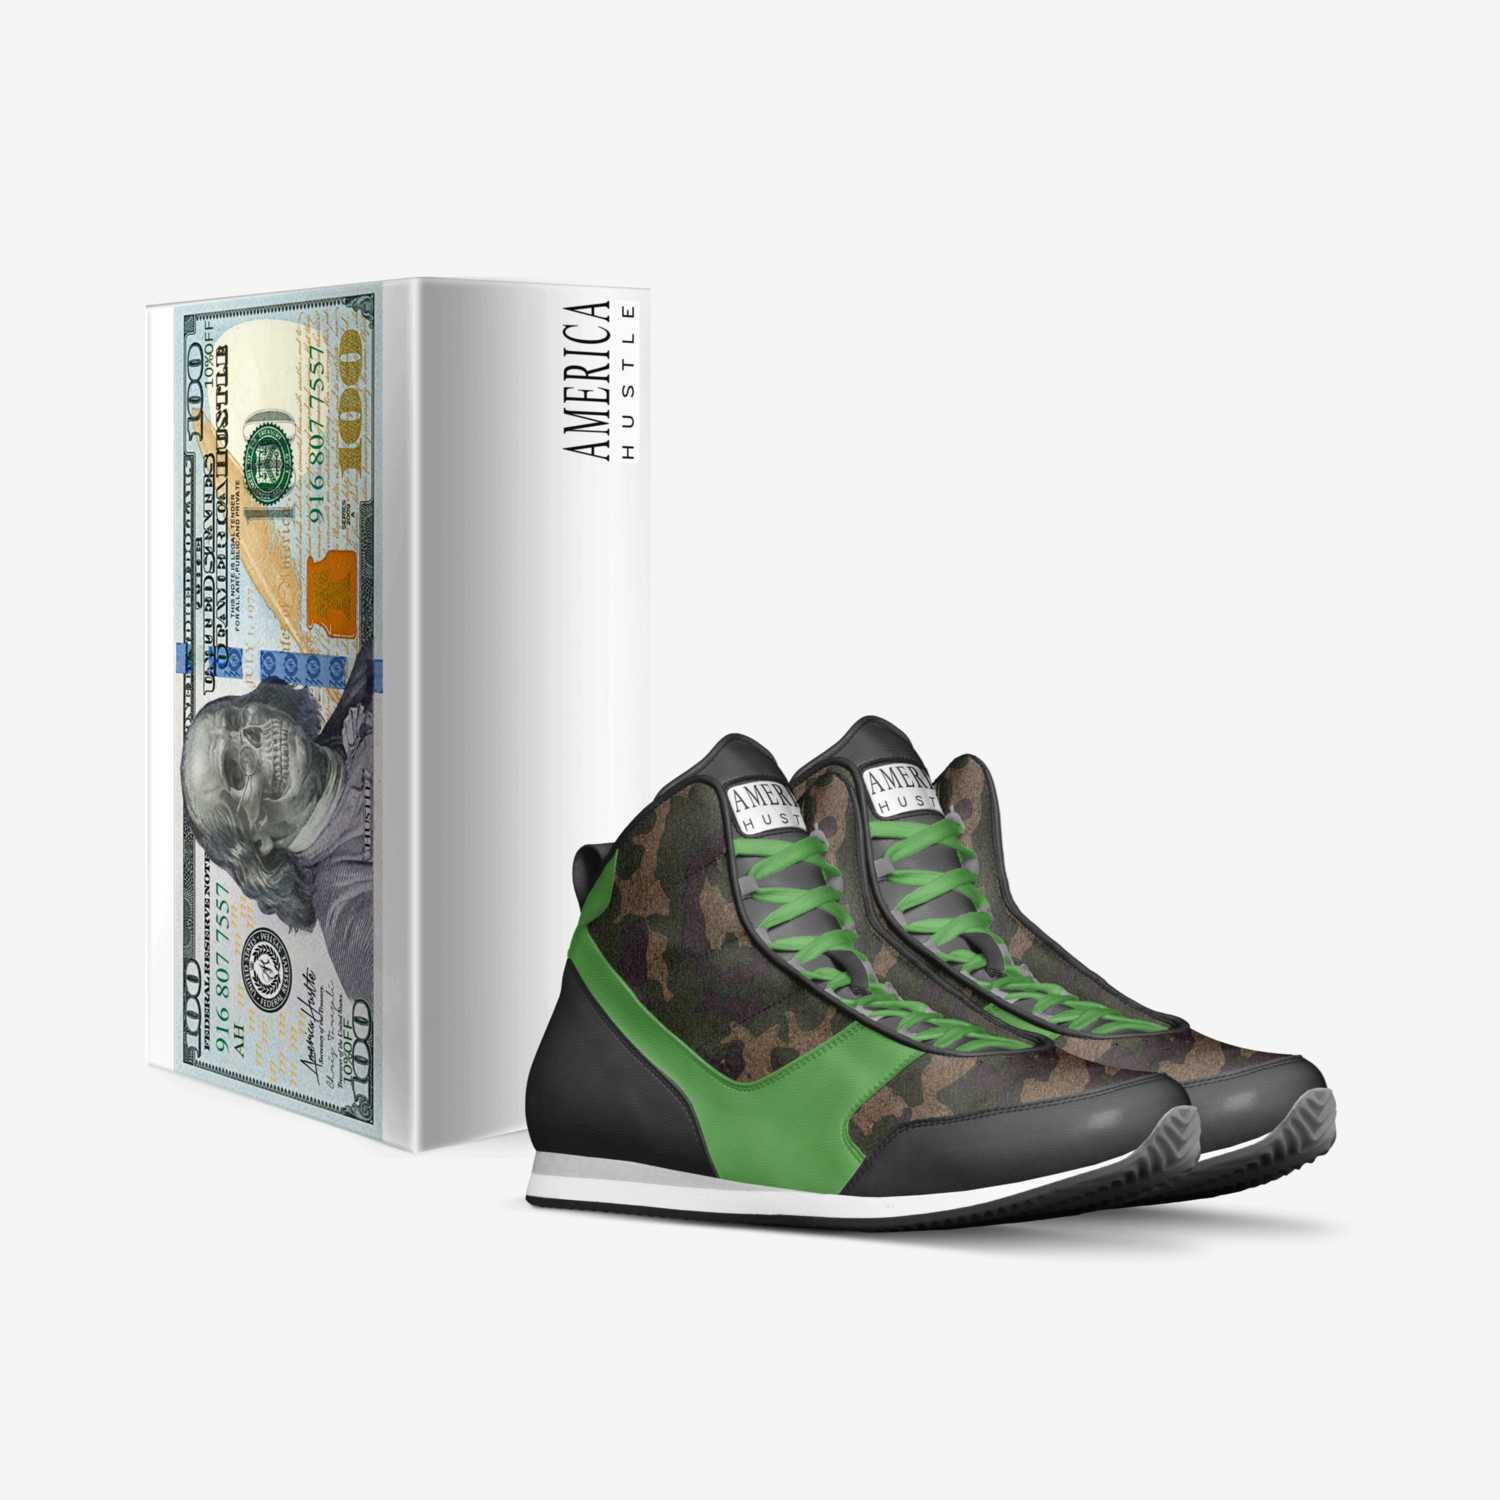 The Dinero custom made in Italy shoes by Chris Tarczali | Box view